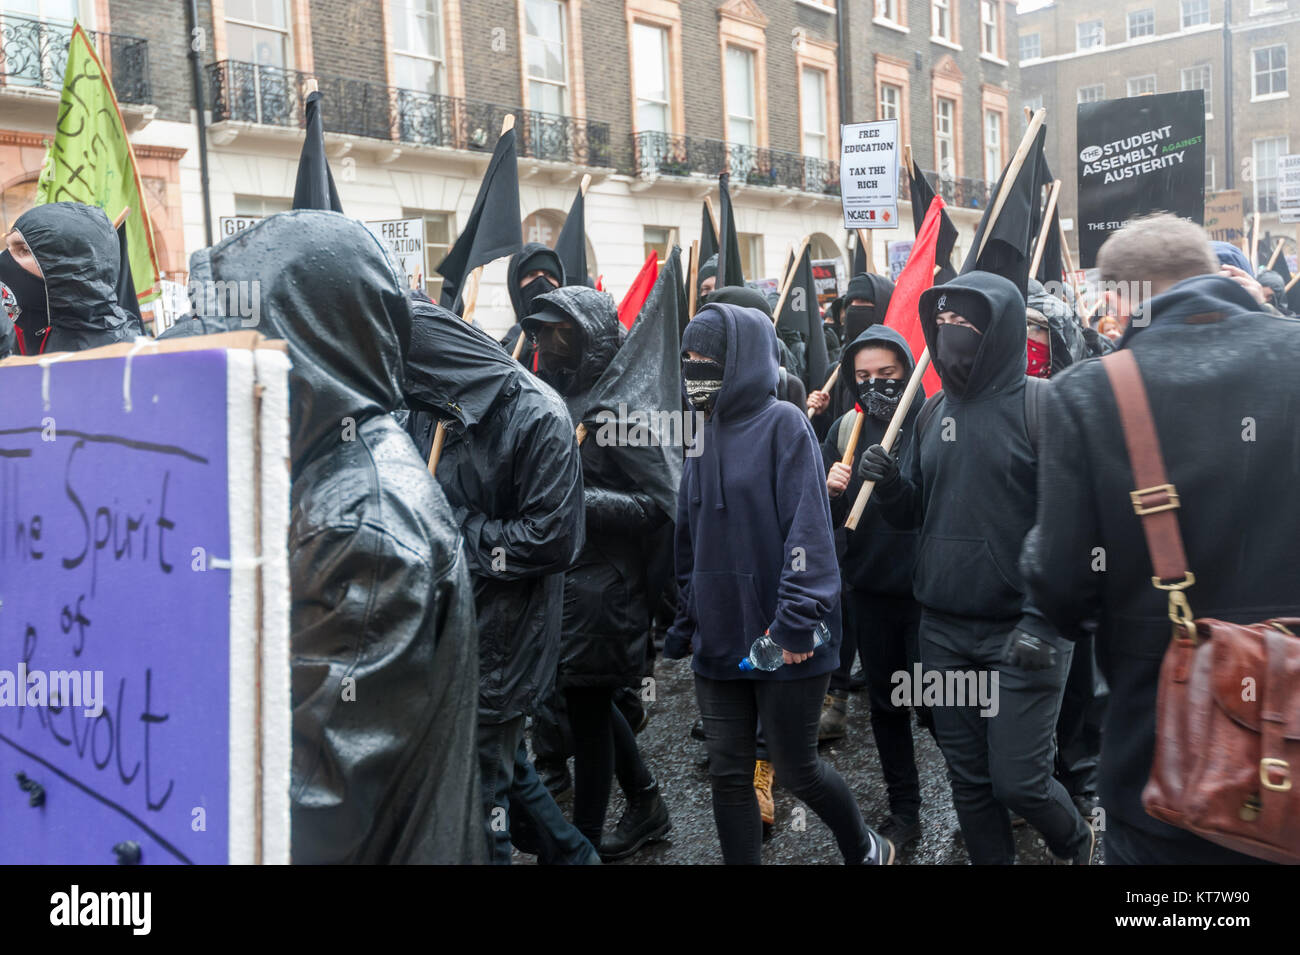 'The Sprit of Revolt' was one of the appropriate 'book' shields carried by black bloc students on the NCAFC Student march for free education - No Barriers, No Borders, No Business Stock Photo